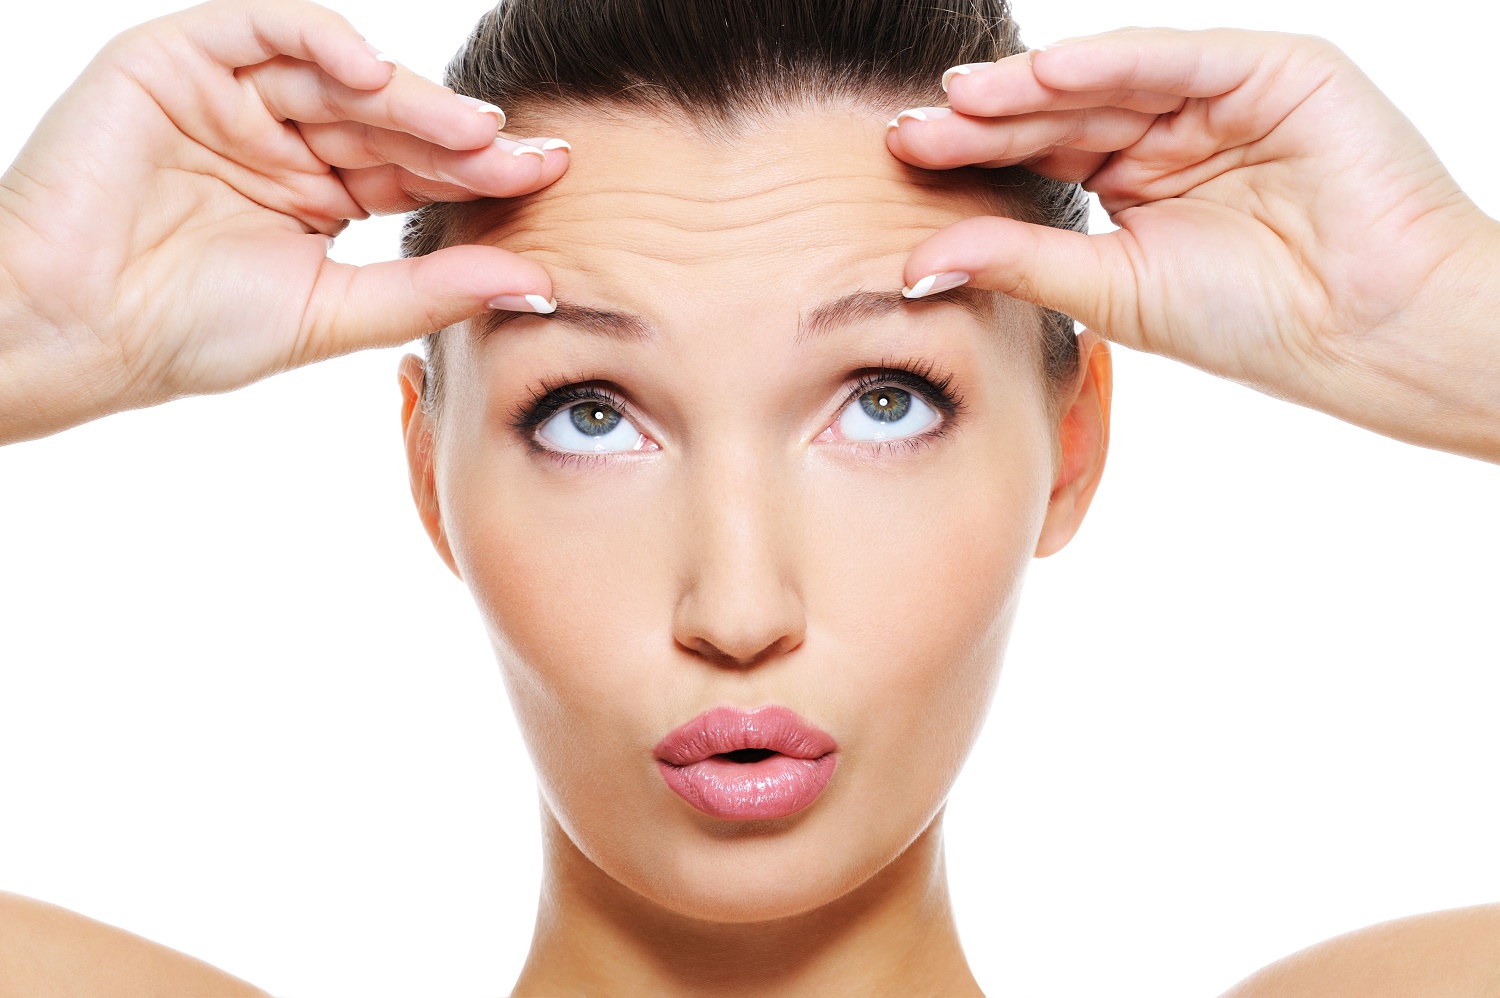 If Your Eyes Are Sagging, Is a Brow Lift or Eyelid Surgery Right?